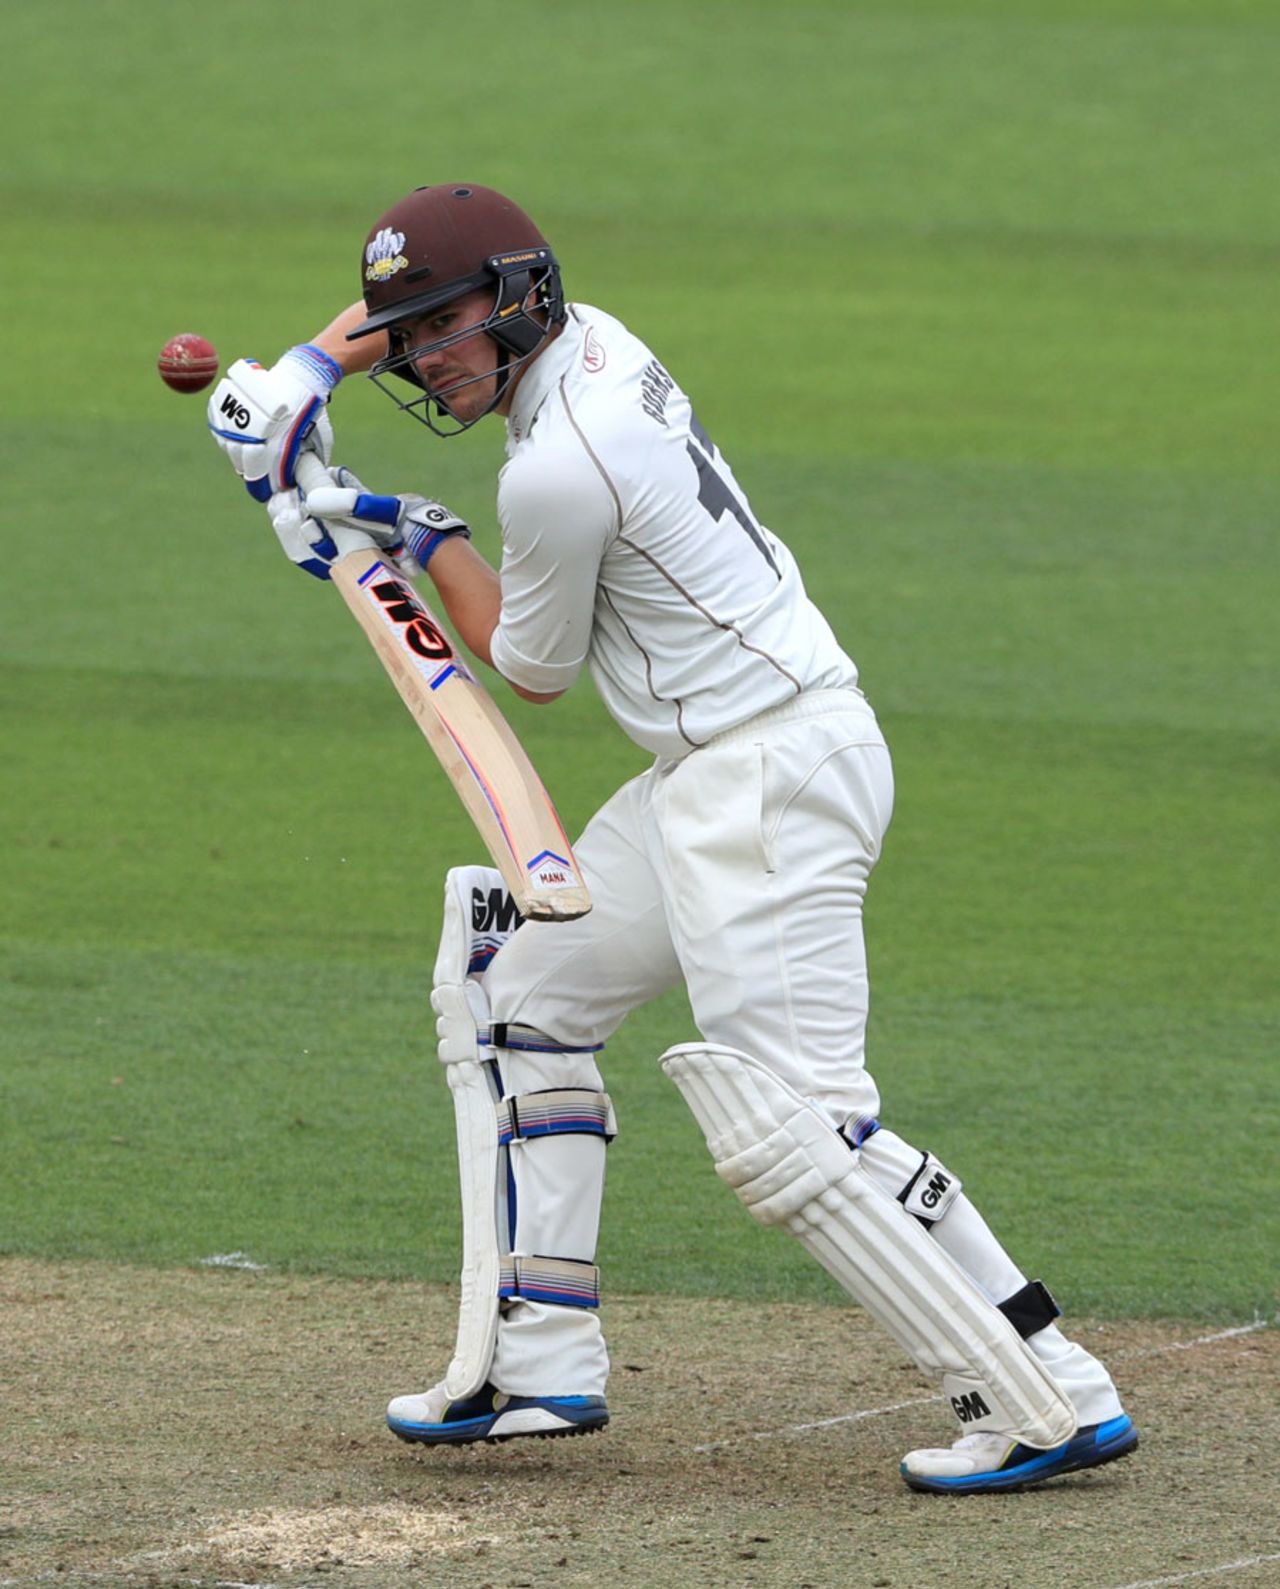 Rory Burns helped see off the new ball, Surrey v Hampshire, County Championship, Division One, The Oval, 1st day, September 6, 2016